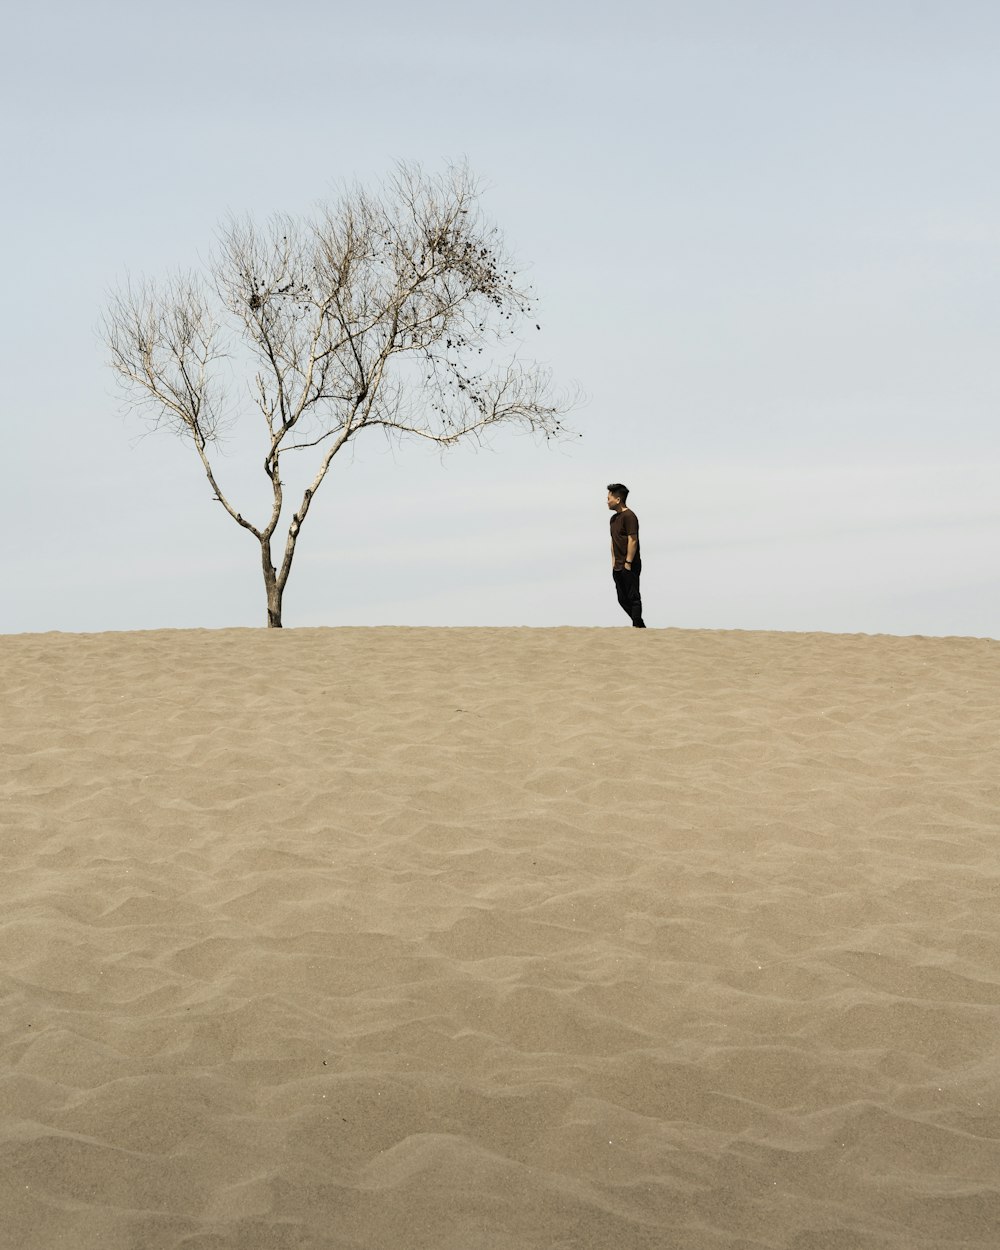 man in black jacket standing on brown sand near bare tree during daytime